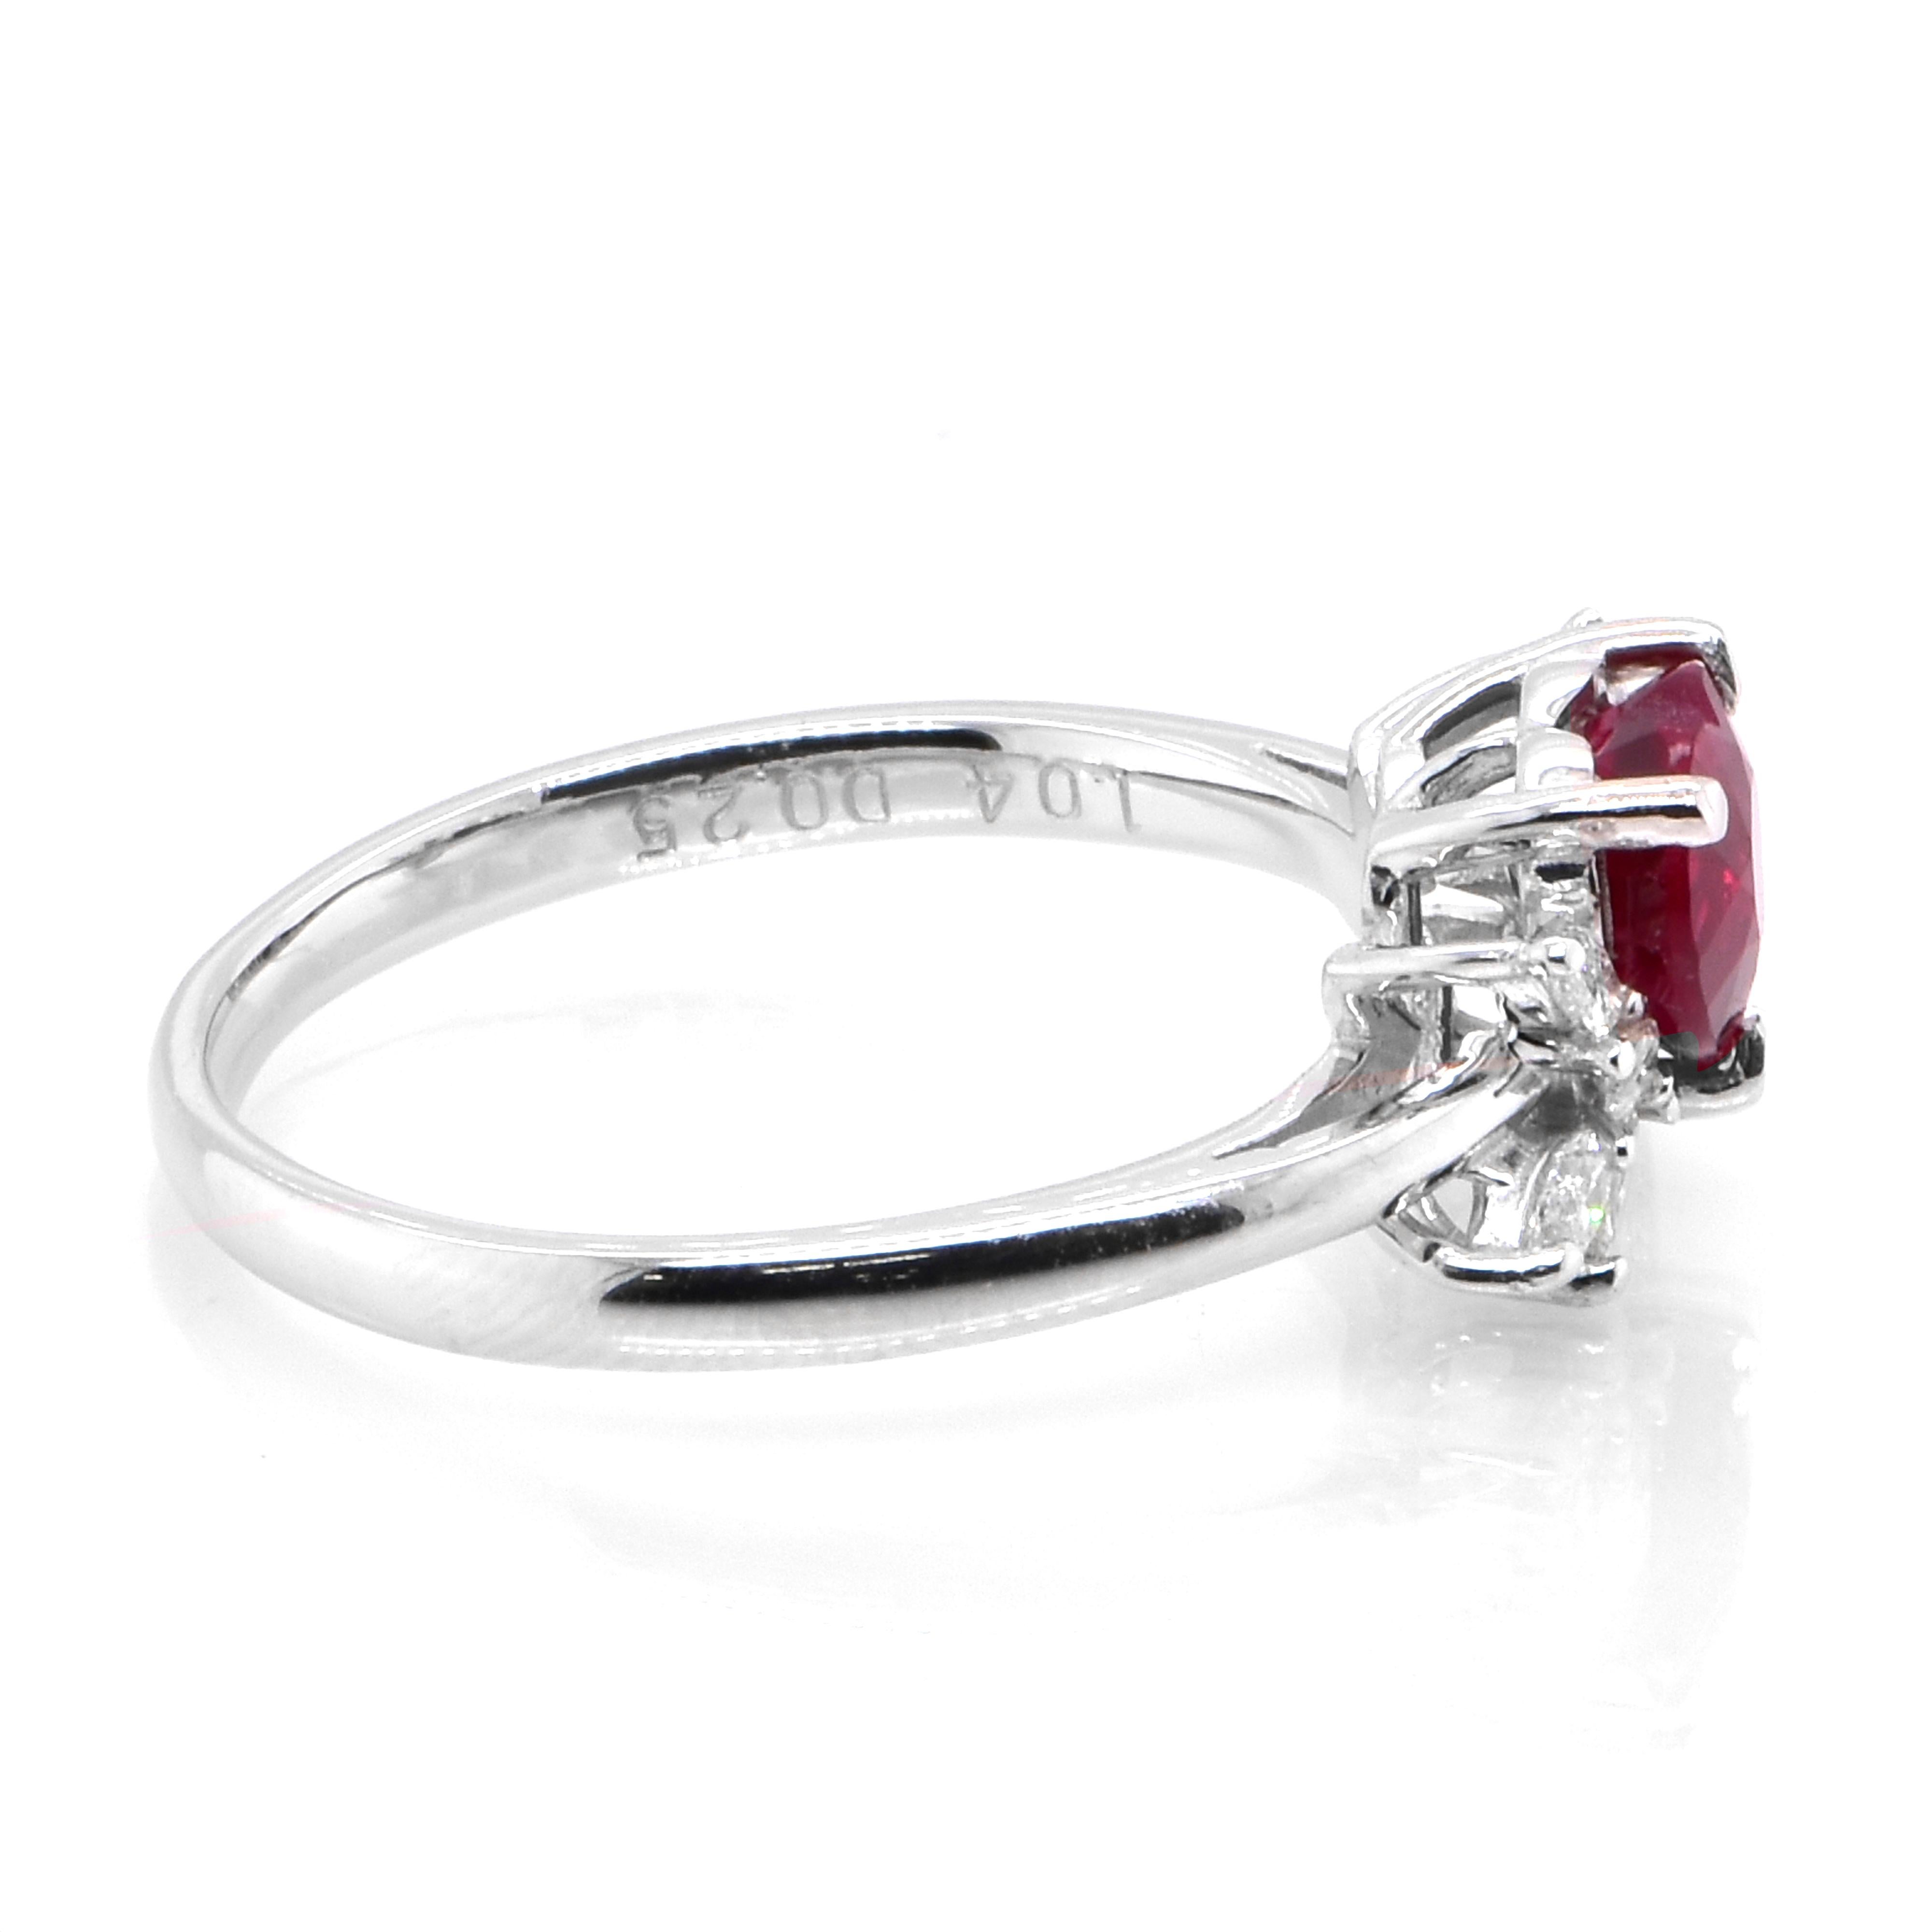 Modern GIA Certified 1.04 Carat, Pigeon Blood Red, Burmese Ruby Ring Made in Platinum For Sale